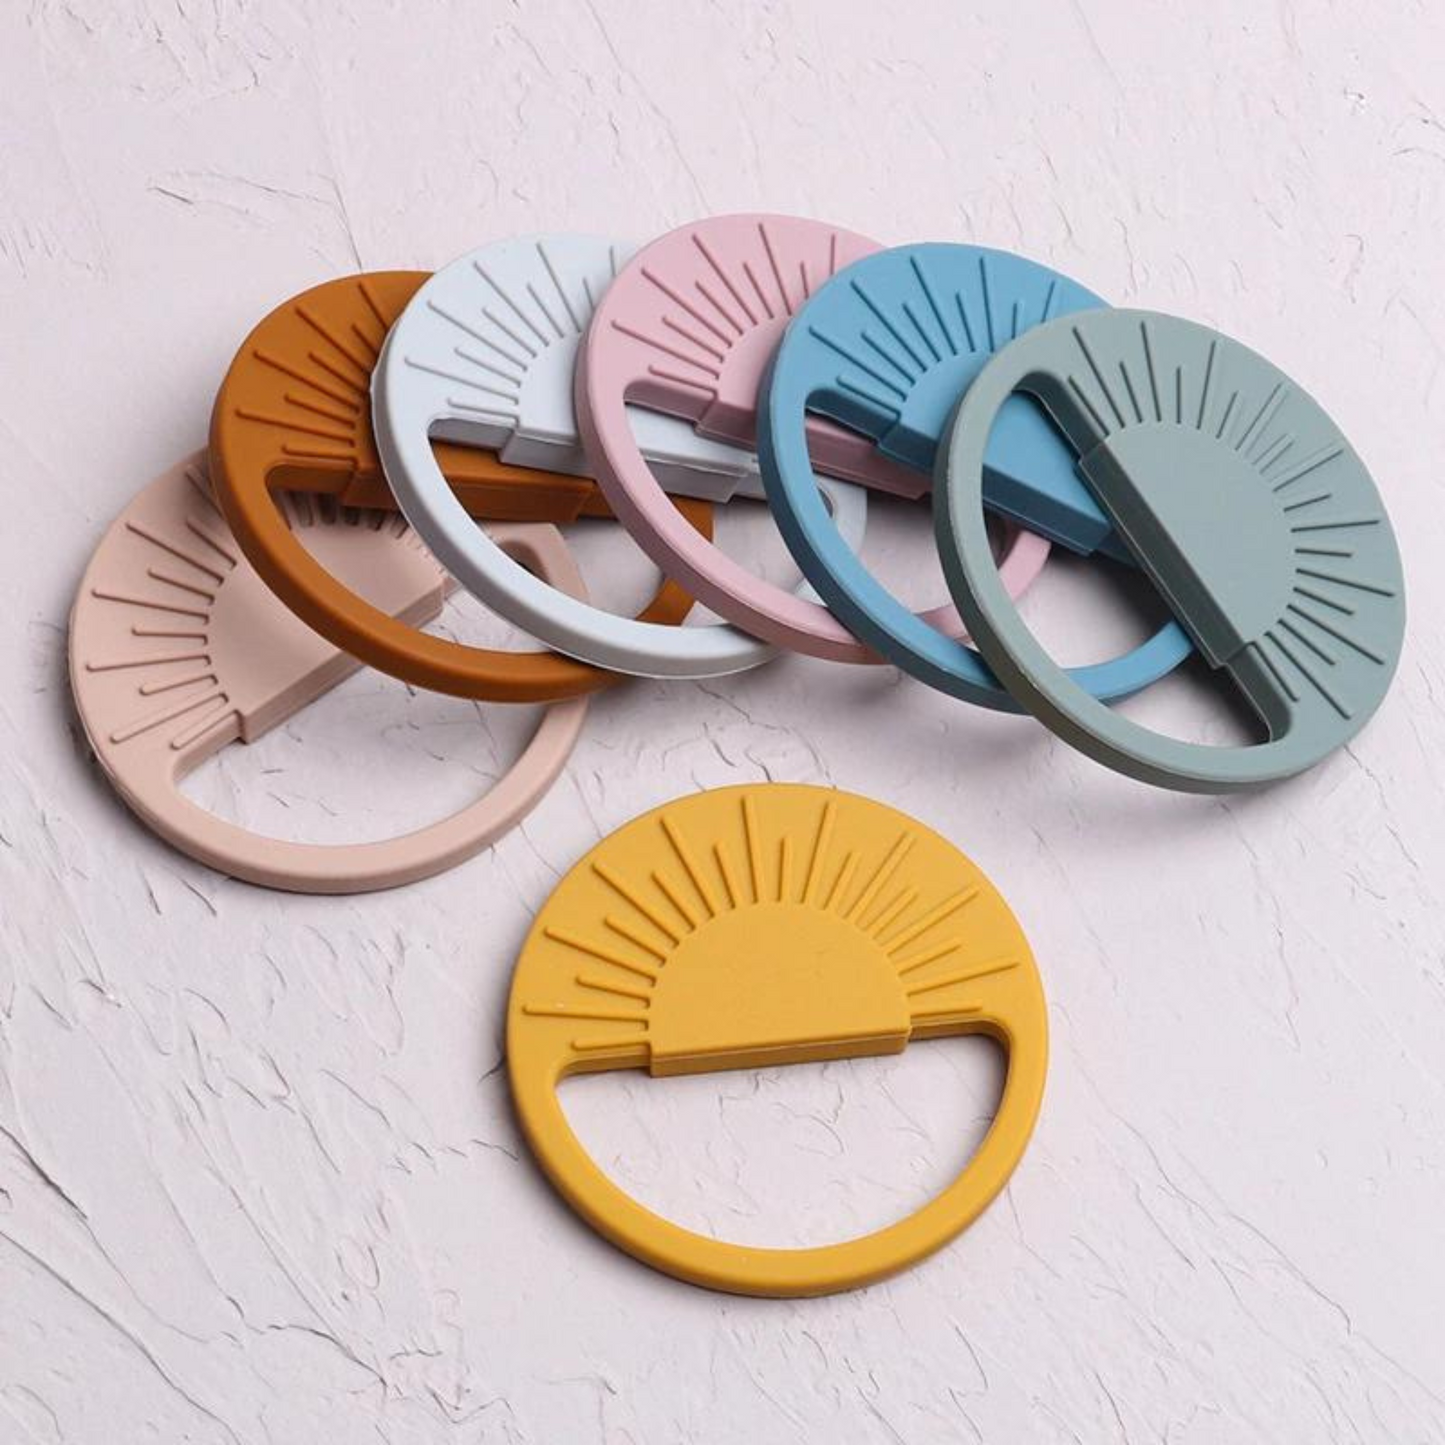 Sun Series Ring Silicone Teether